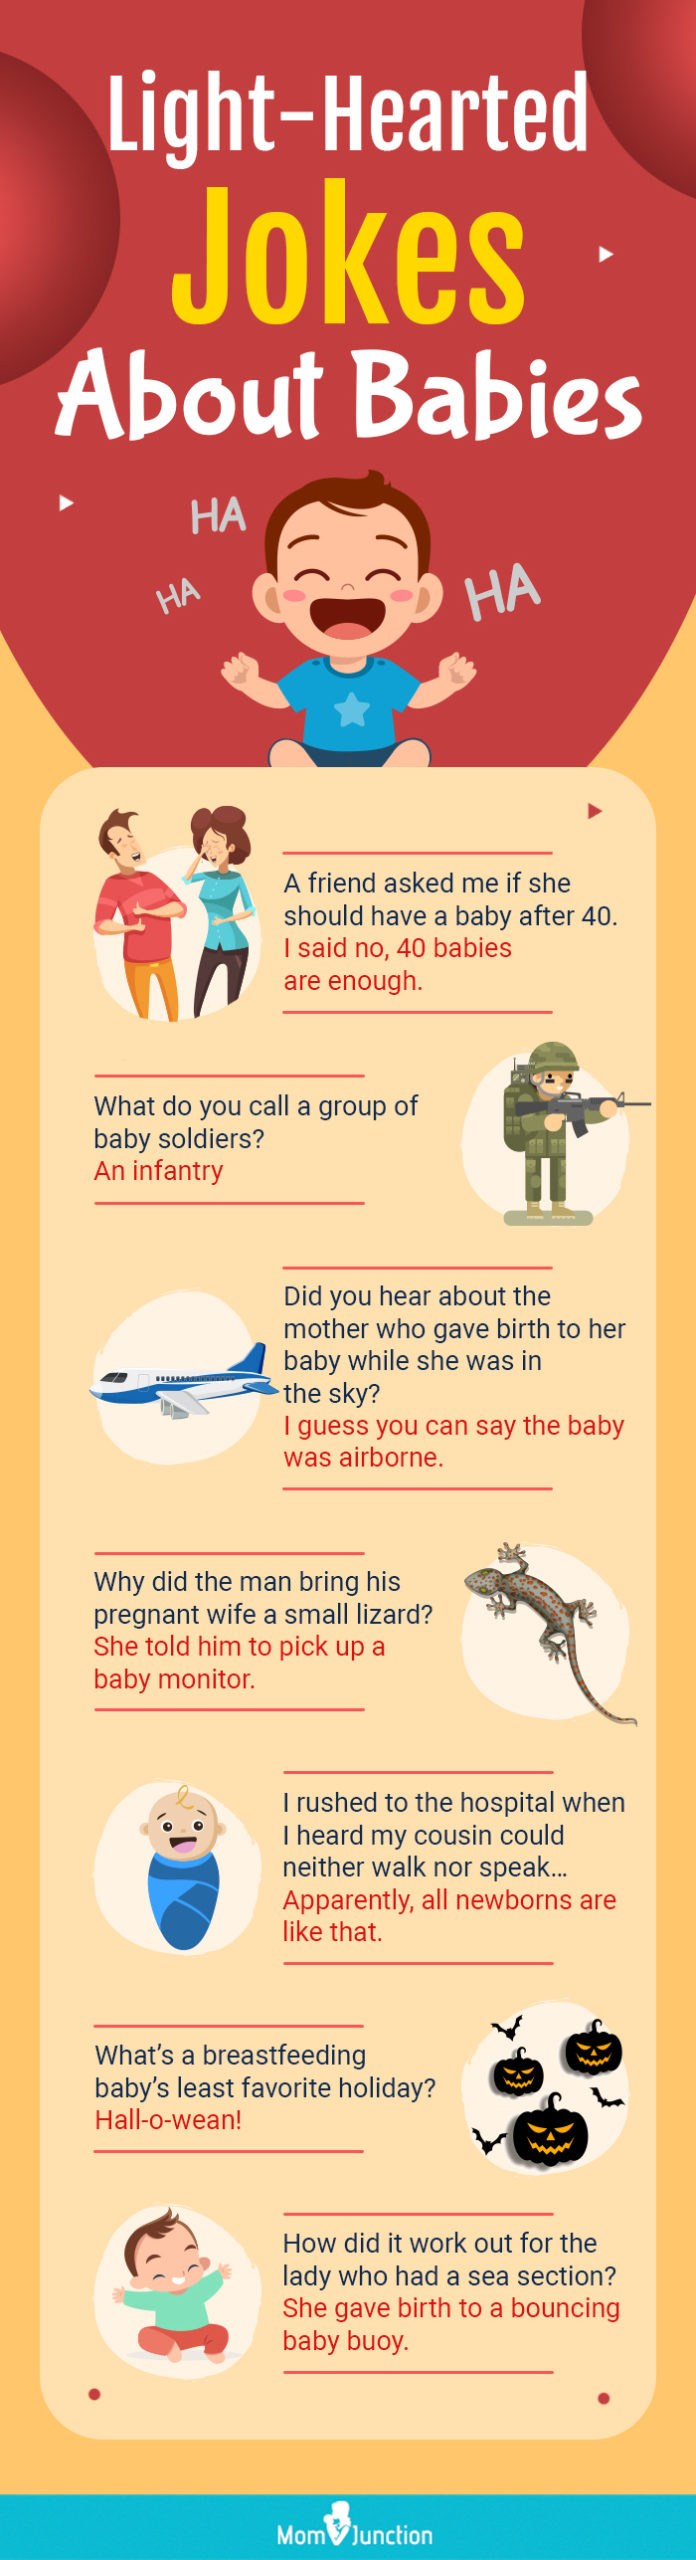 jokes about babies (infographic)